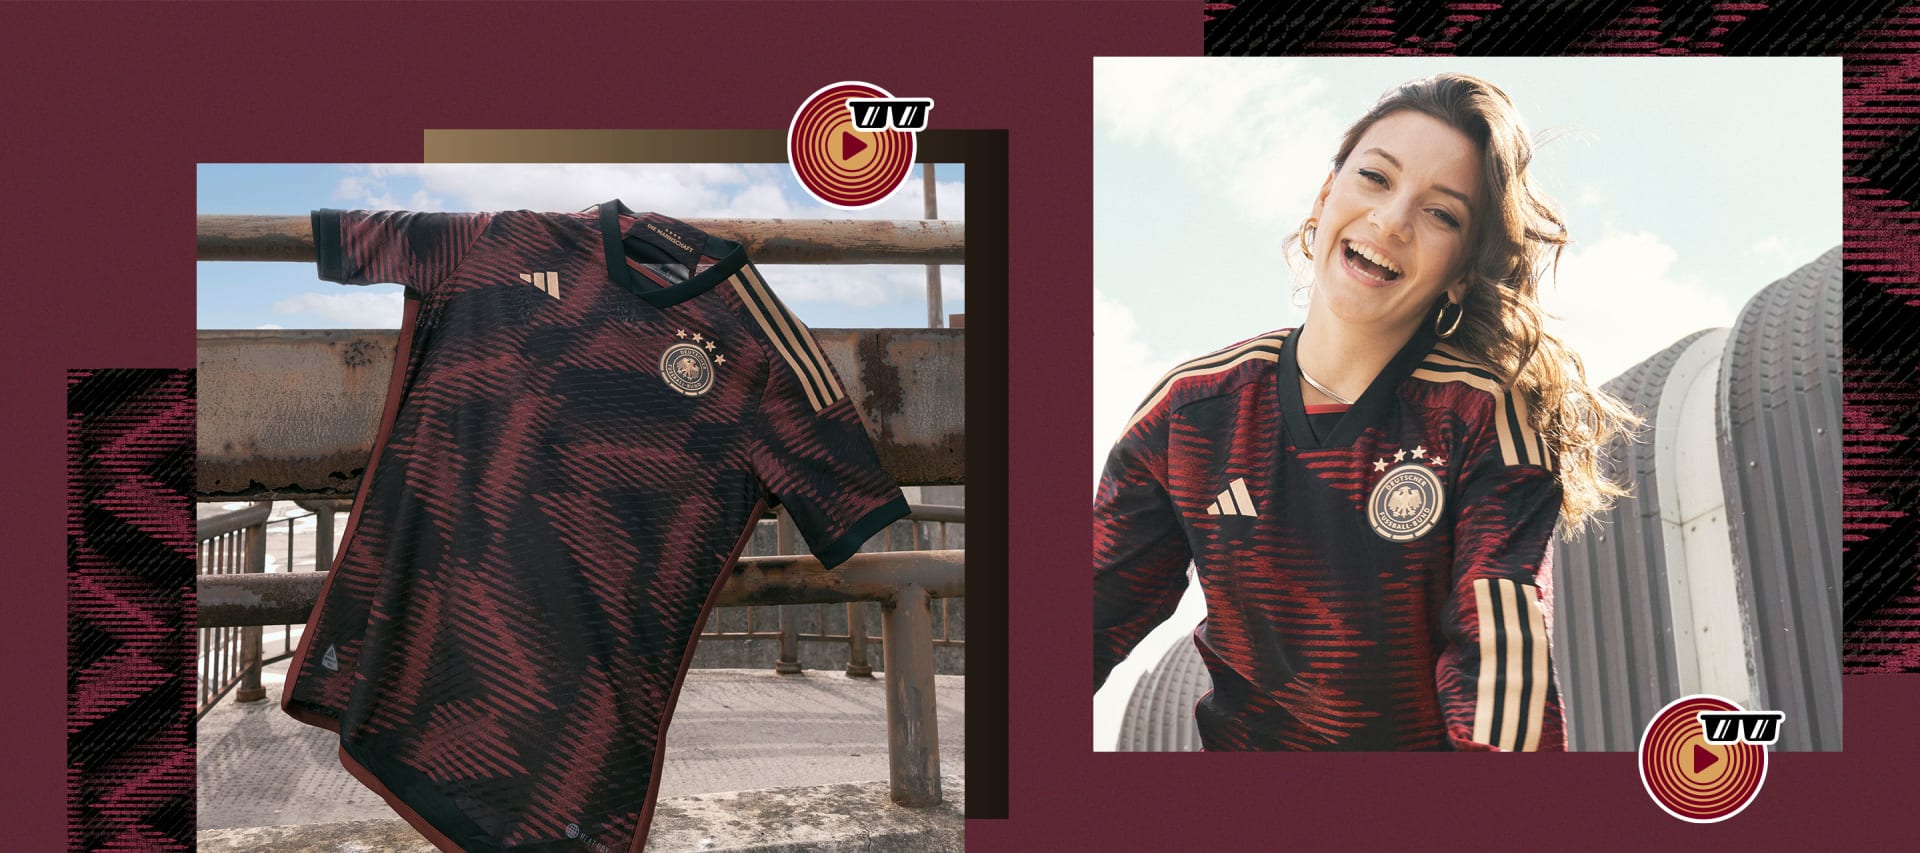 Germany Away Kit 2022 - World Cup 2022